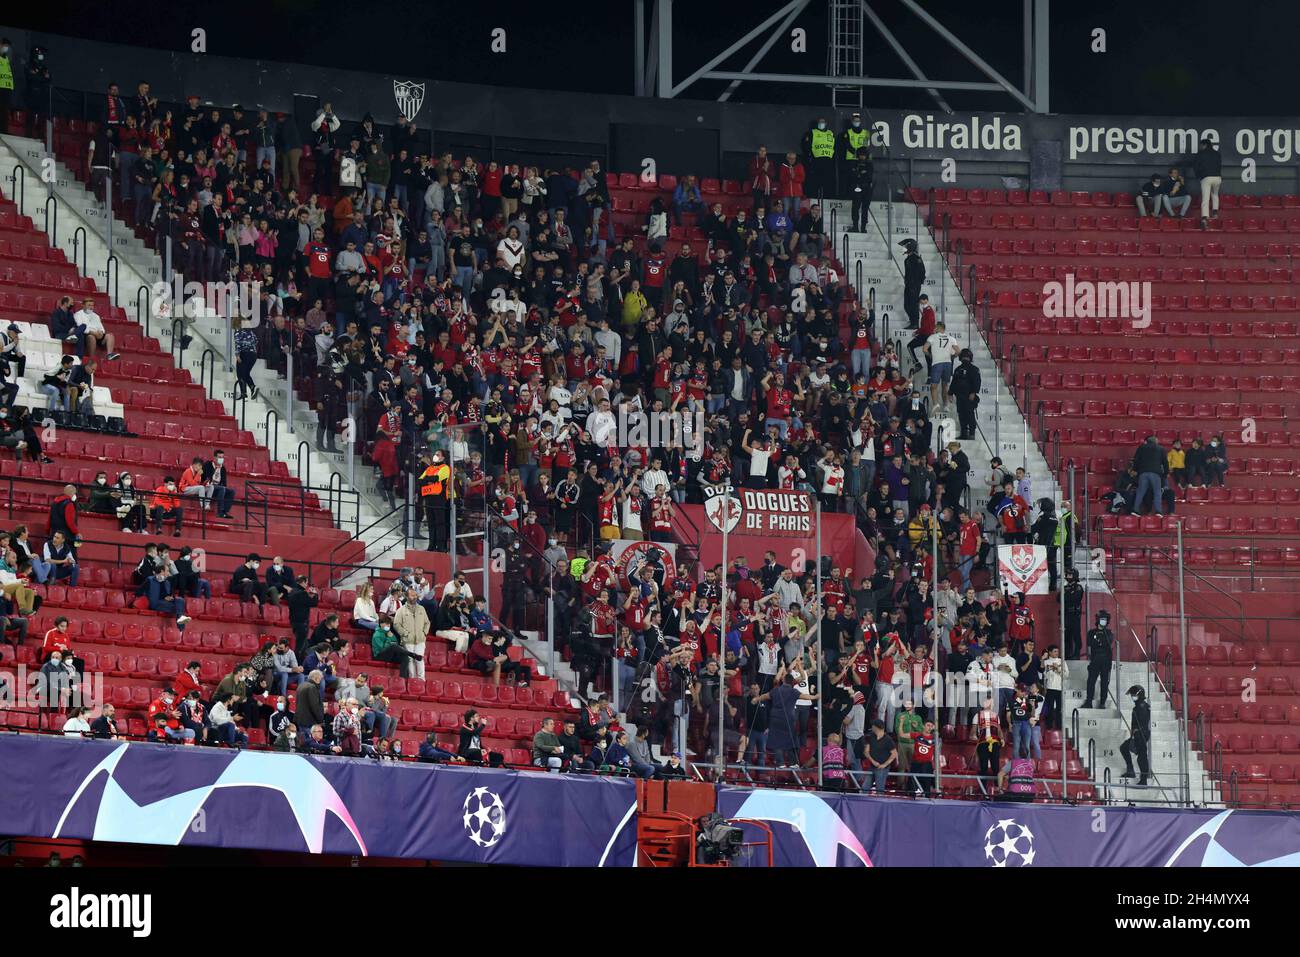 Seville, Seville, Spain. 2nd Nov, 2021. Supporters of LOSC Lille M?tropole  during the UEFA Champions League Group G stage match between Sevilla FC and  LOSC Lille MÅ½tropole at Ramon Sanchez Pizjuan on